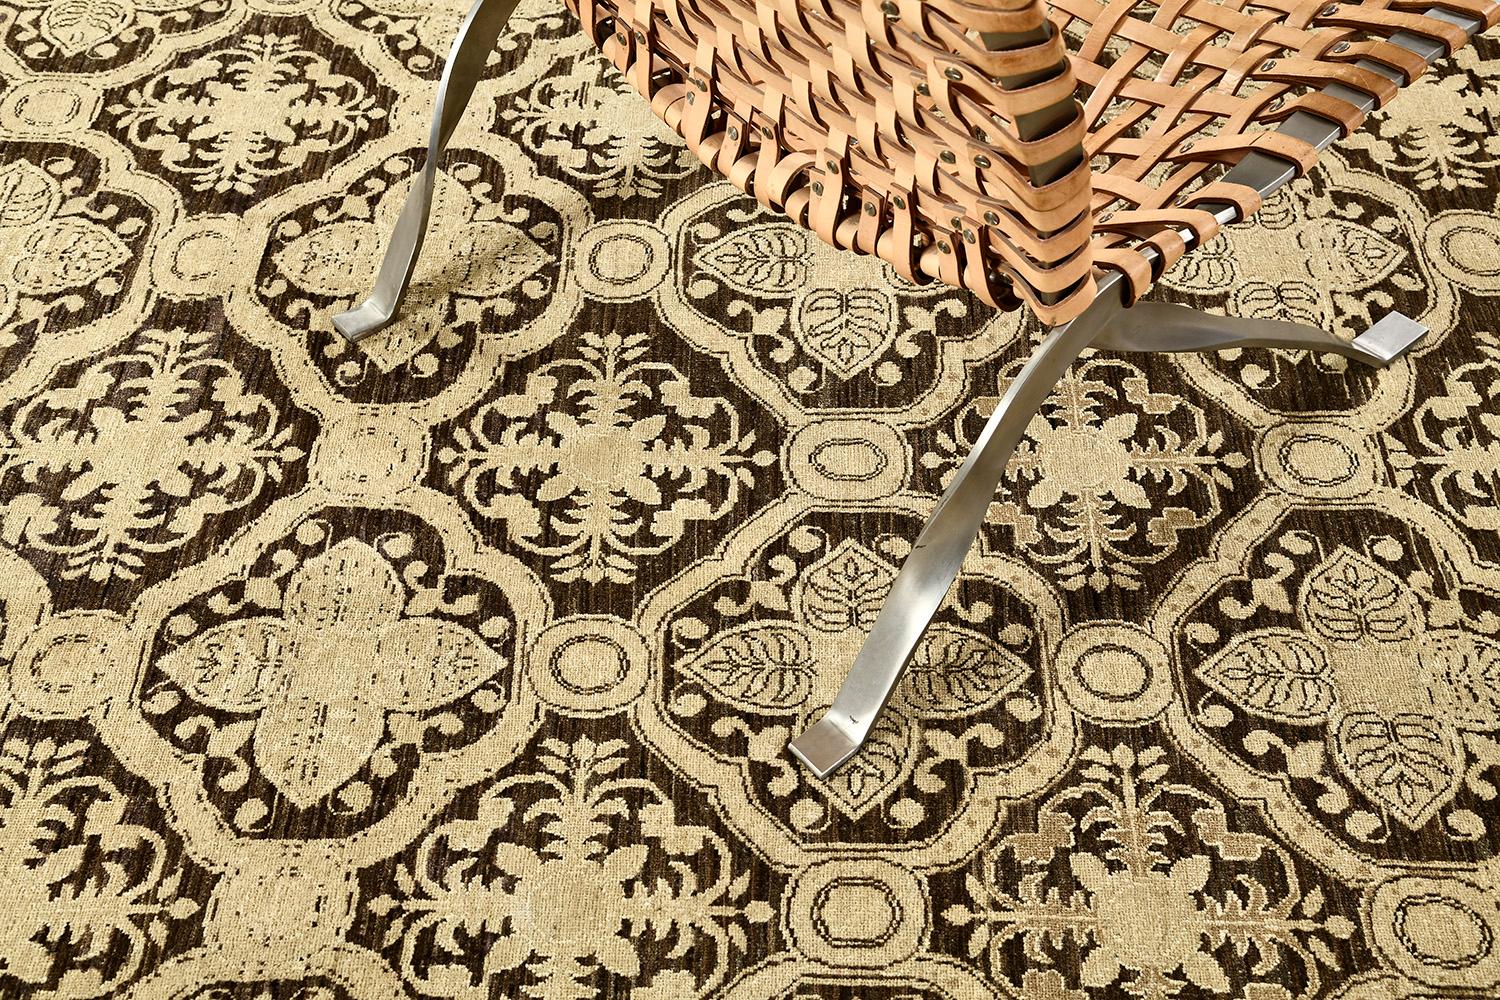 Acknowledged for the fascinating floral design of this Vintage Style Arts and Crafts Design revival creation, this rug that was gracefully made from high quality hand spun wool, features all-over botanical pattern surrounded by fascinating floral